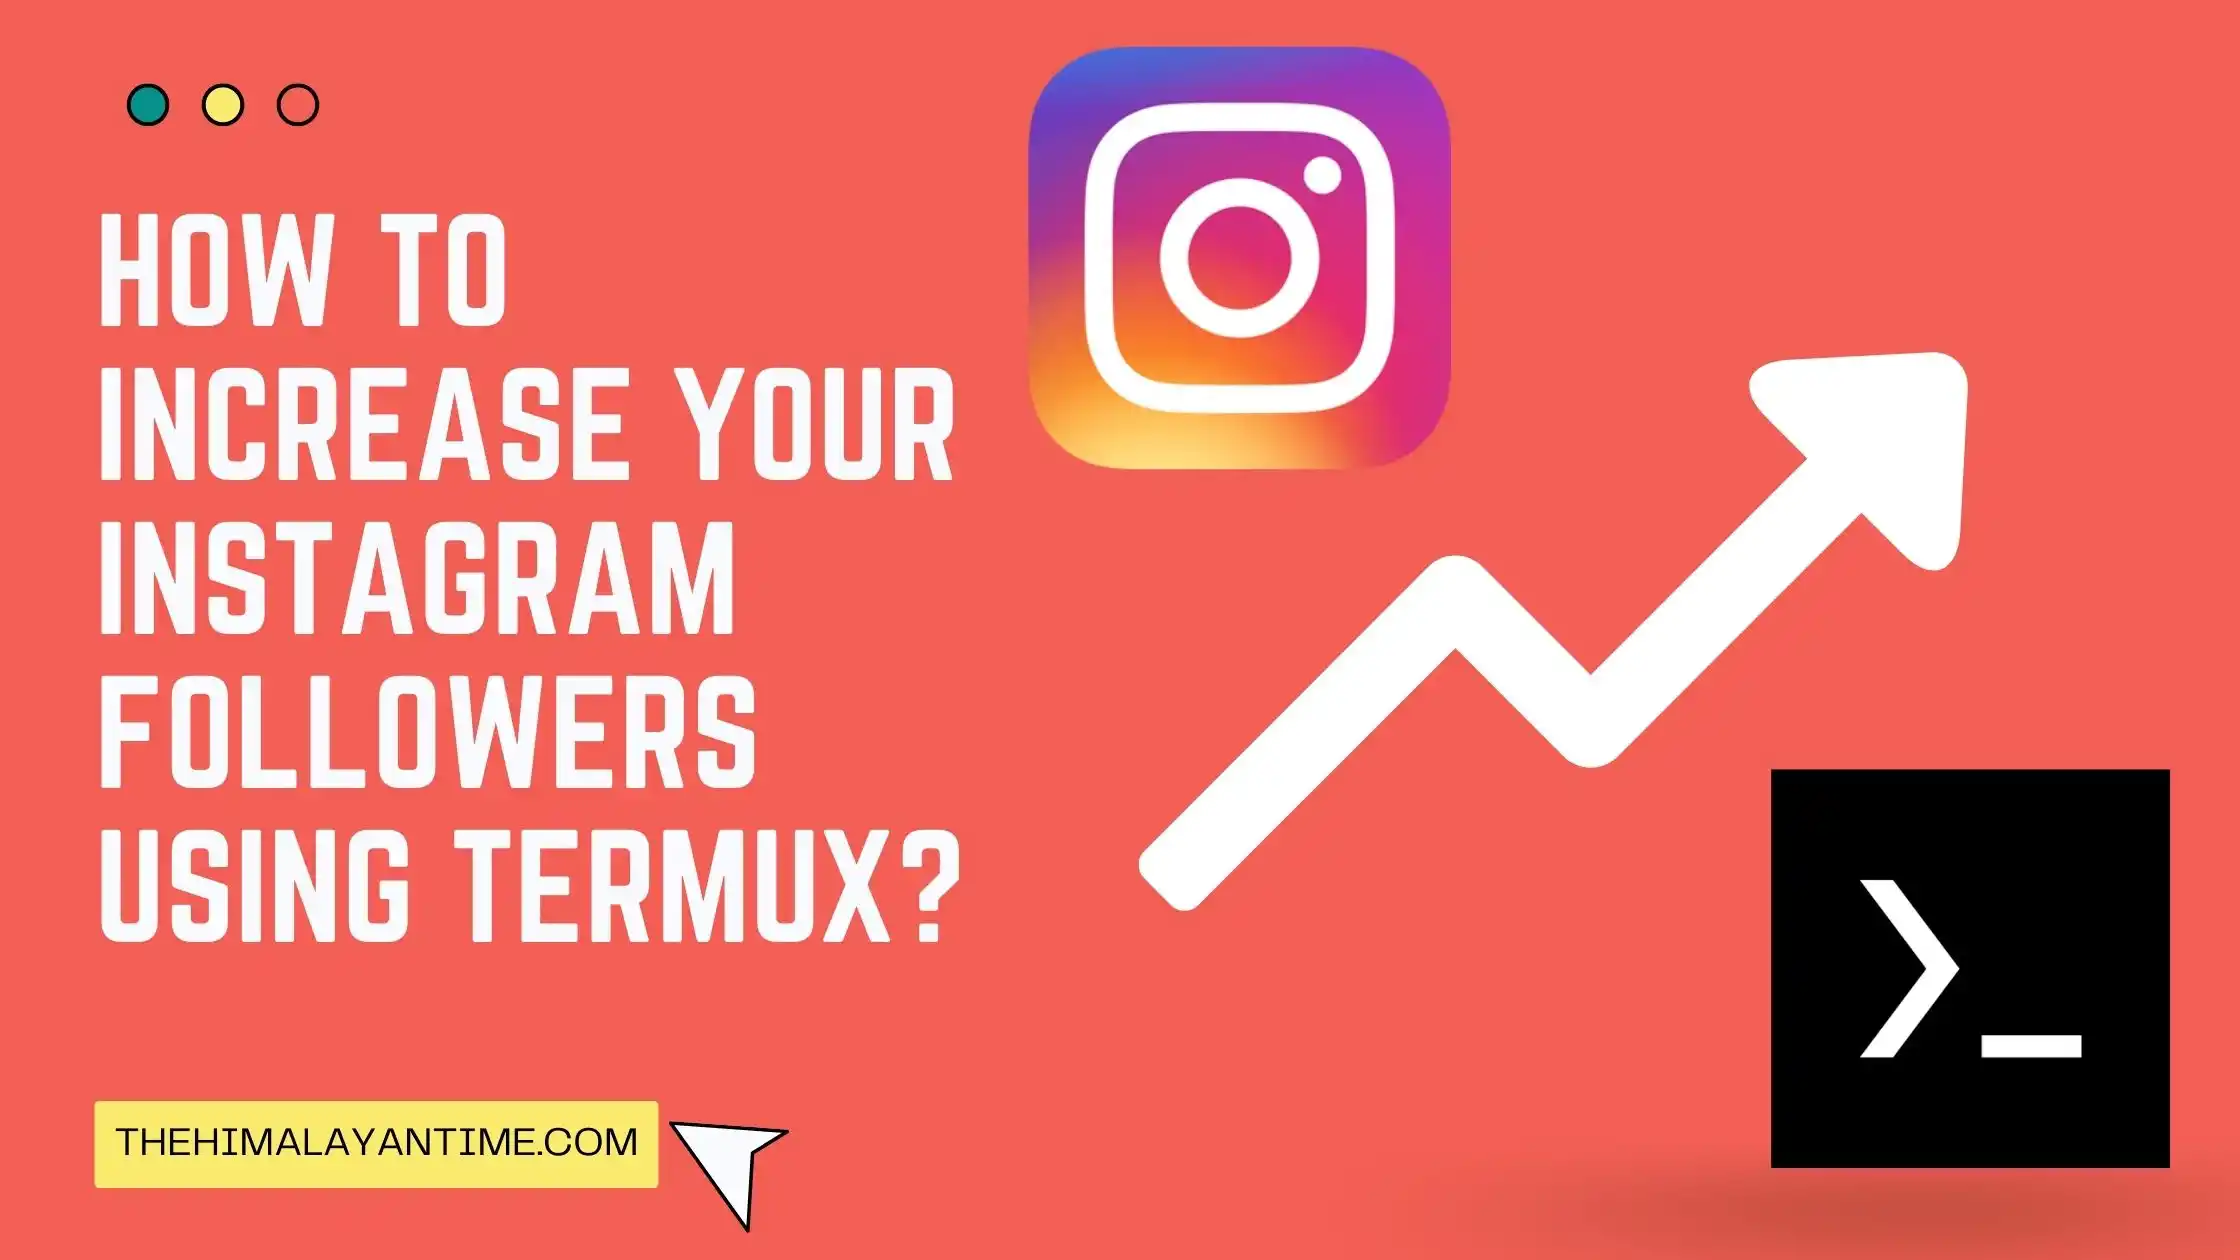 Increase Your Instagram Followers Using Termux